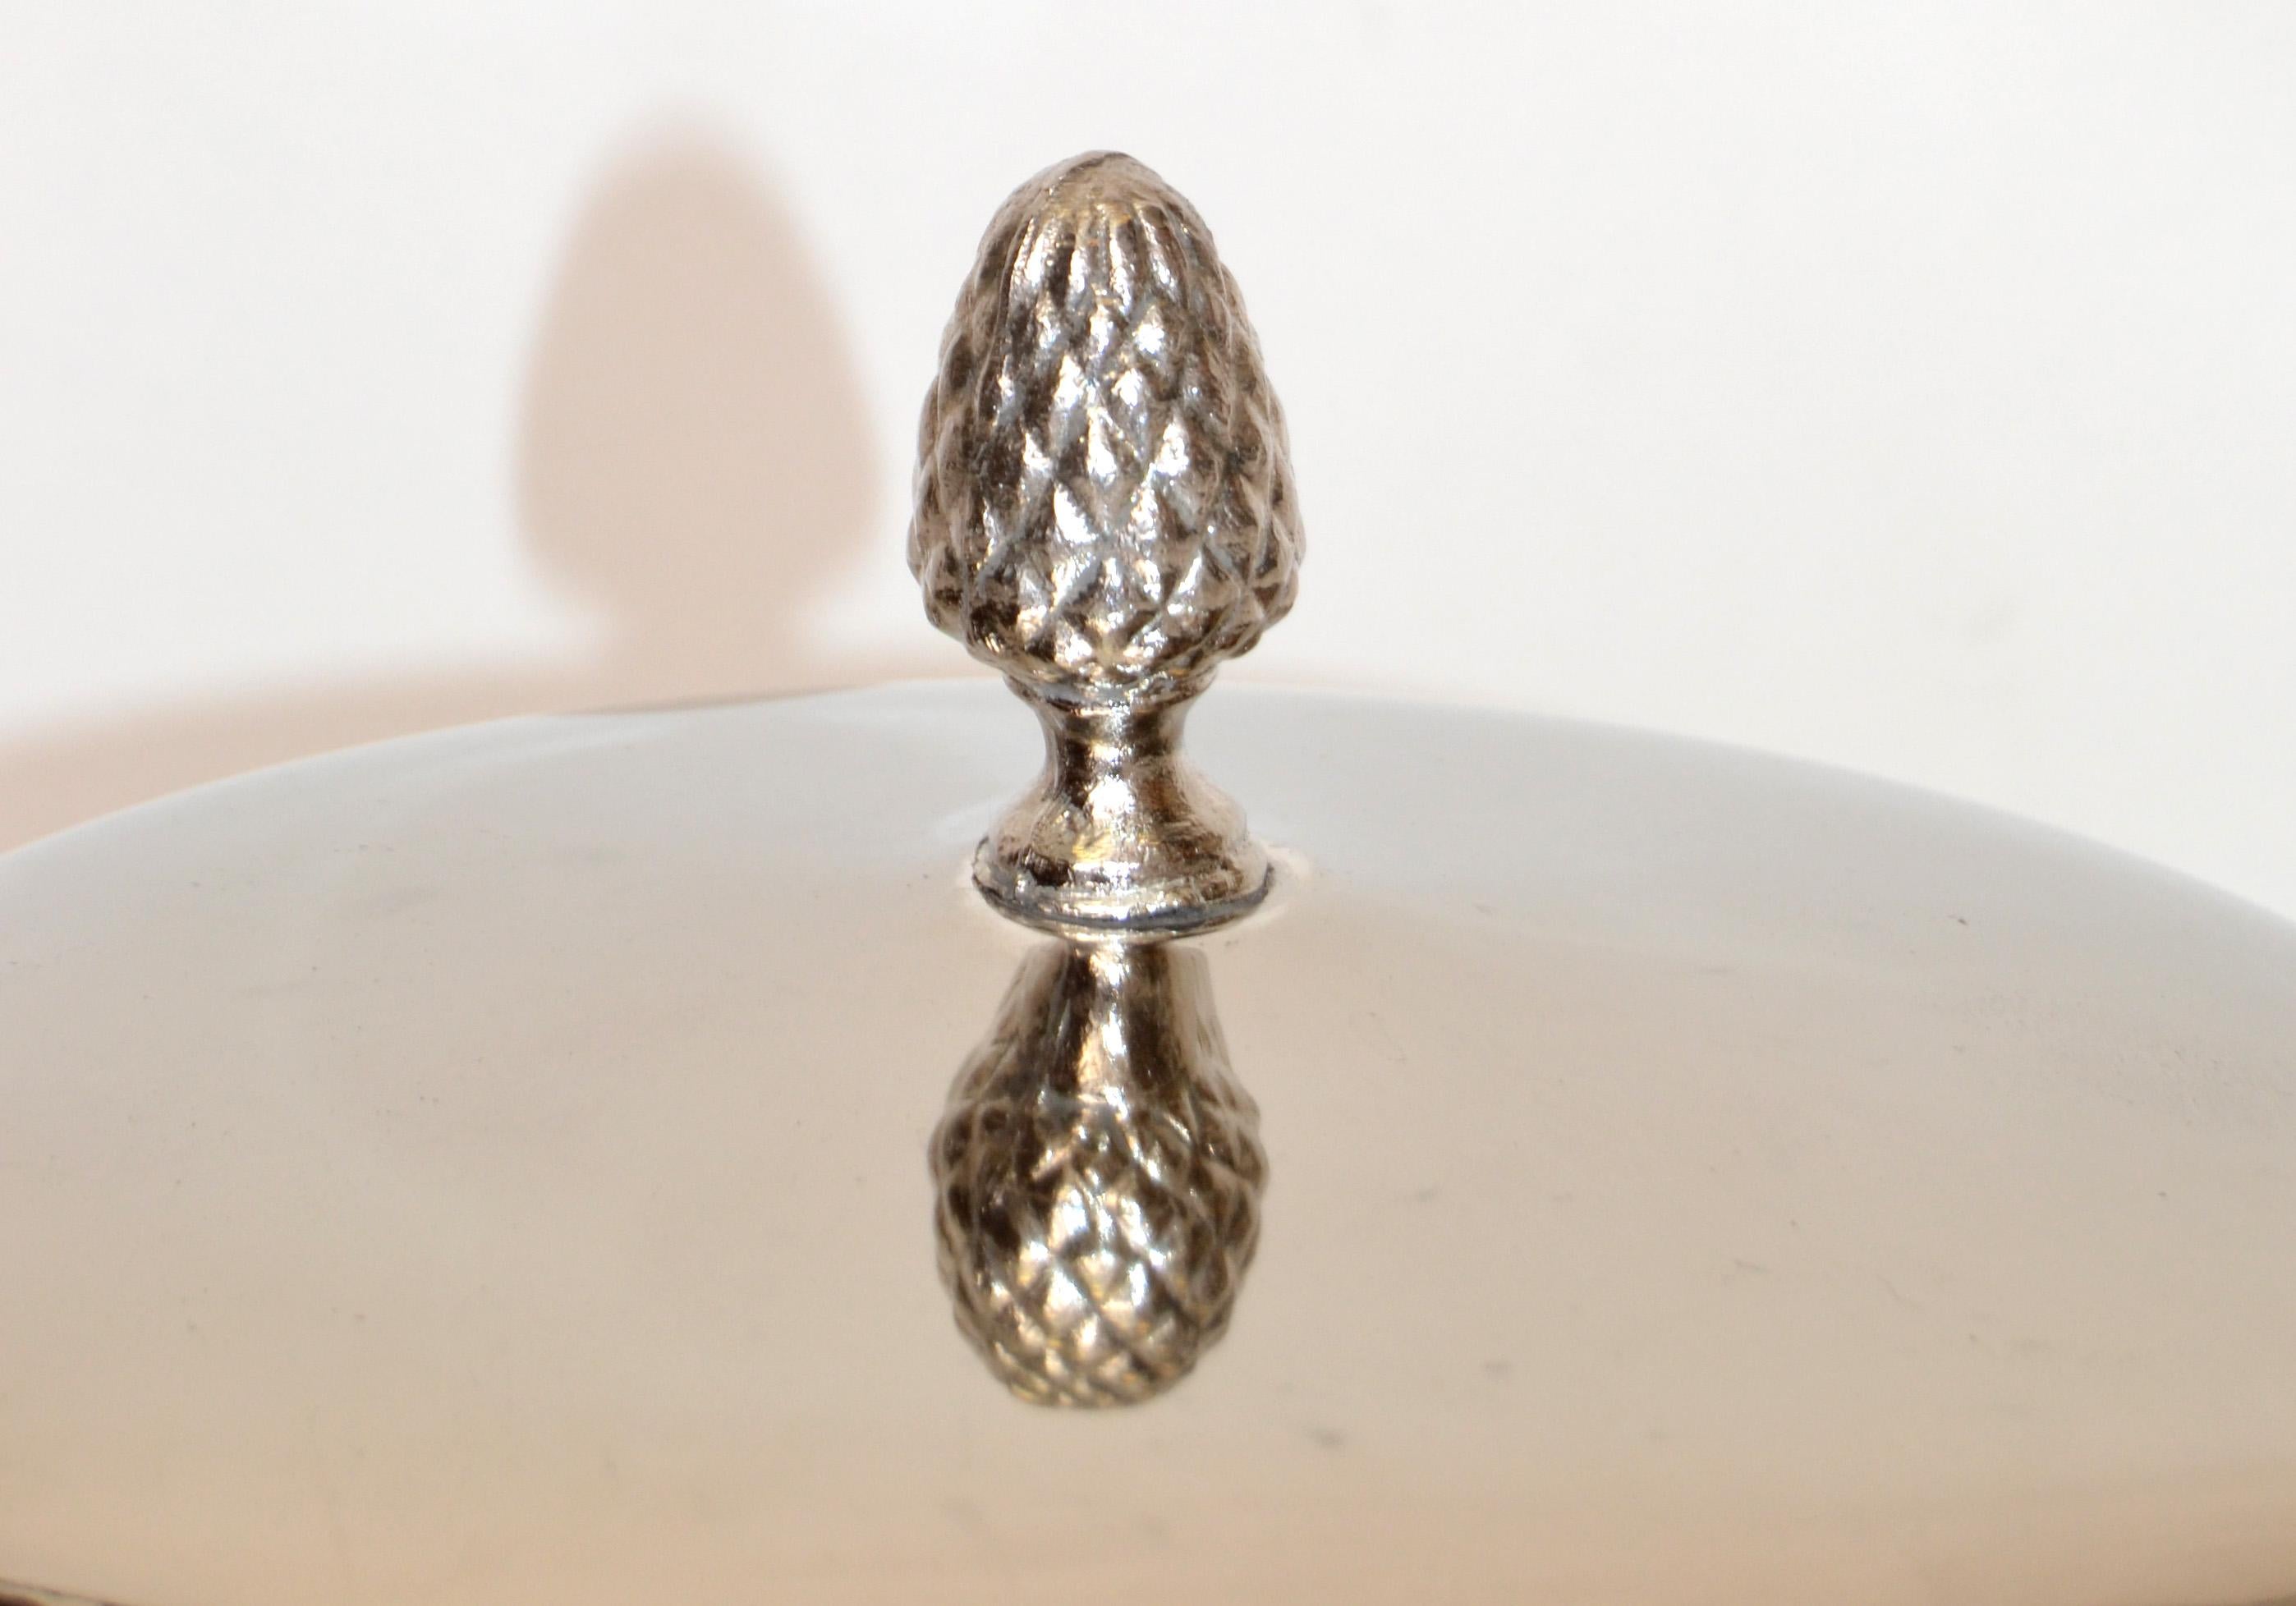 1970s, Victorian Traditional Towle Silver Plated Lidded Bowl Pinecone Finial In Good Condition For Sale In Miami, FL